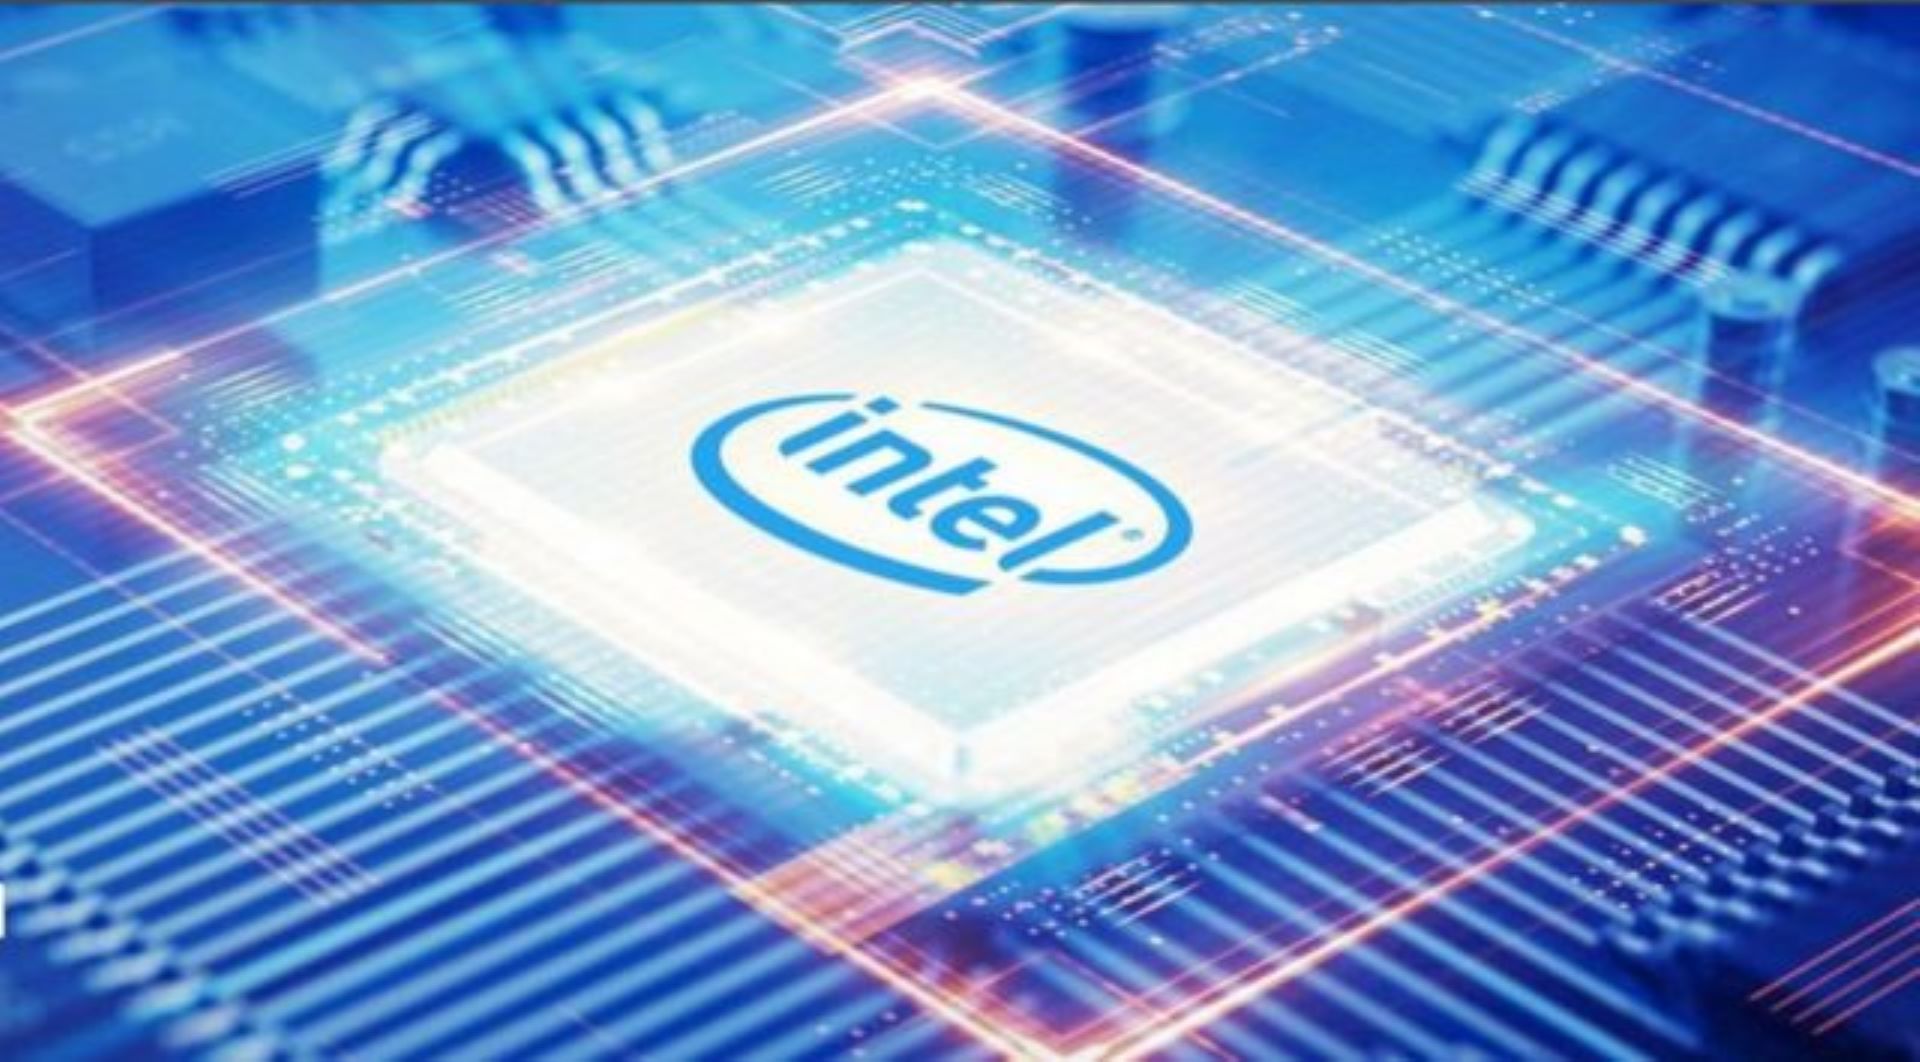 Intel's Alder Lake i3 CPU could pack a surprising budget gaming PC punch